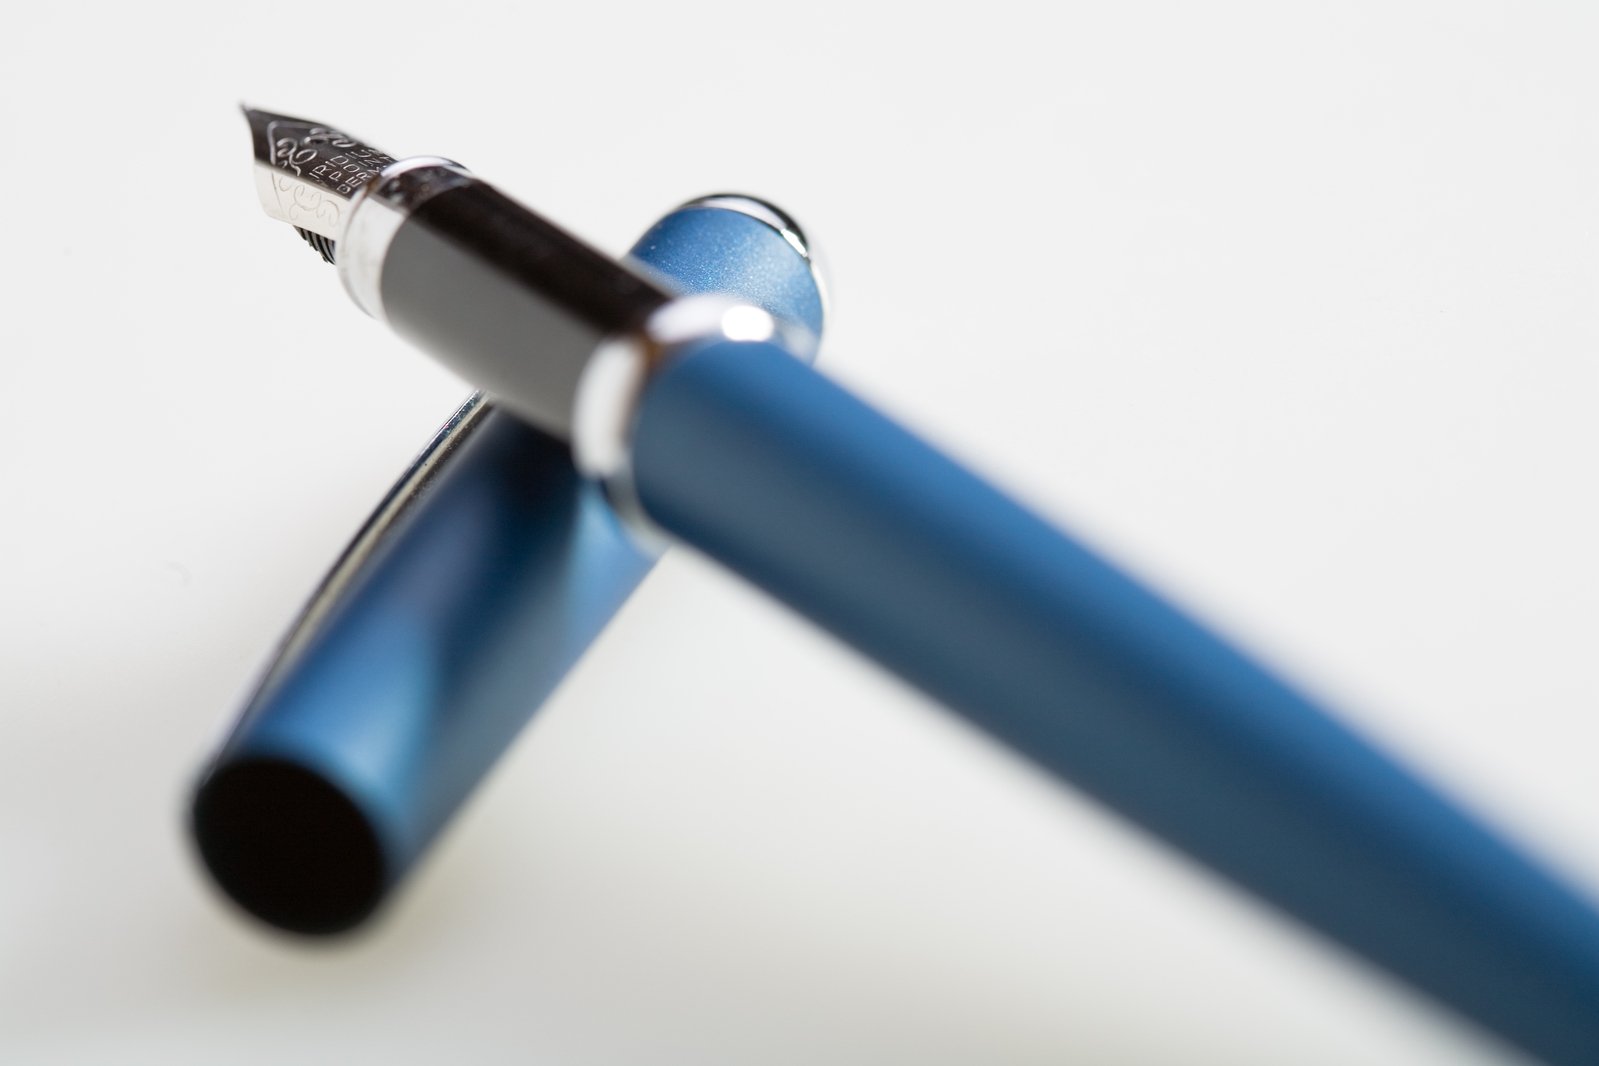 there is a very large blue and silver pen with a pointed tip